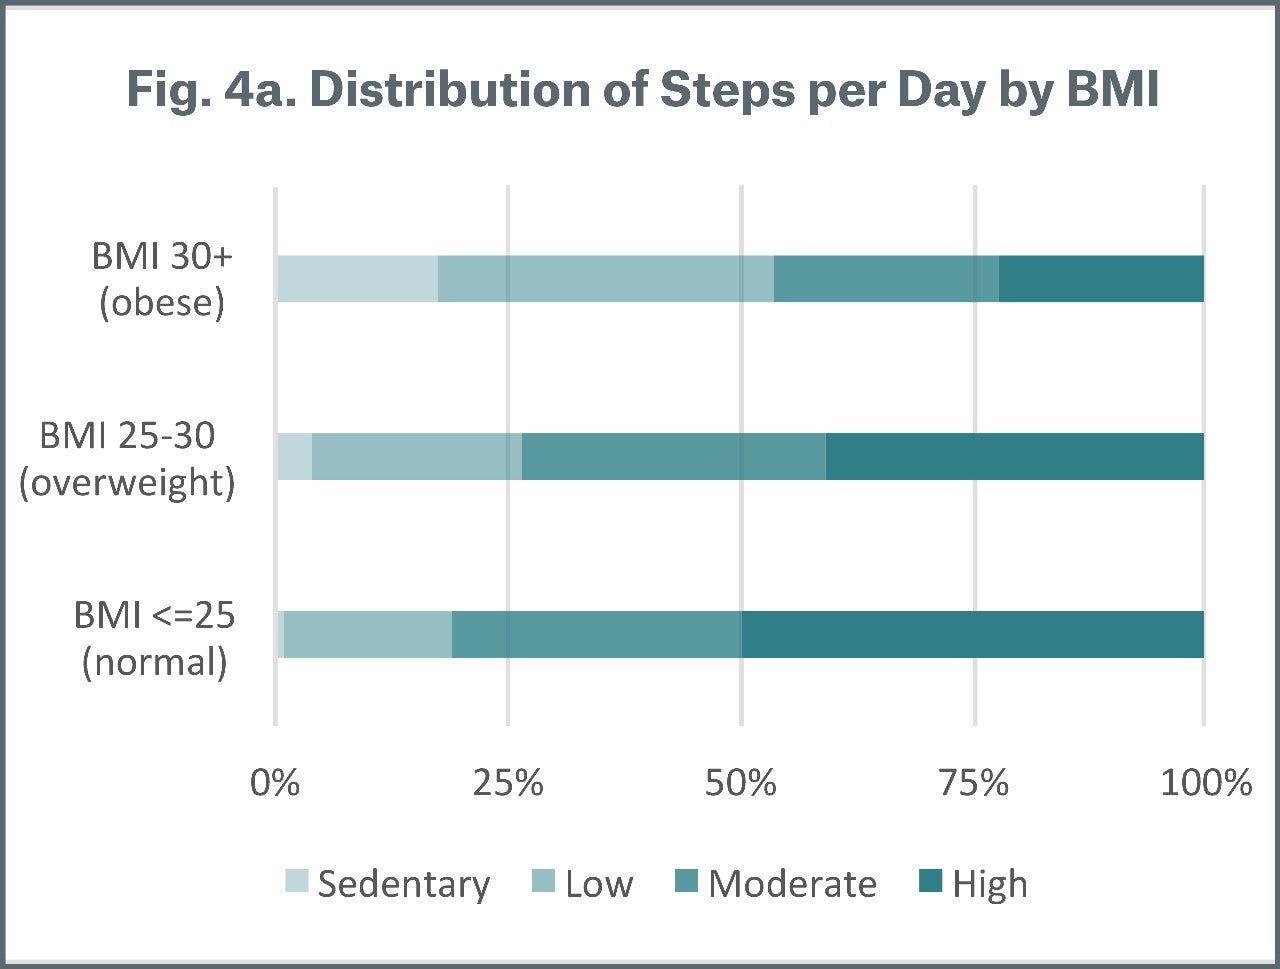 Figure 4a Distributions of Steps per Day by BMI